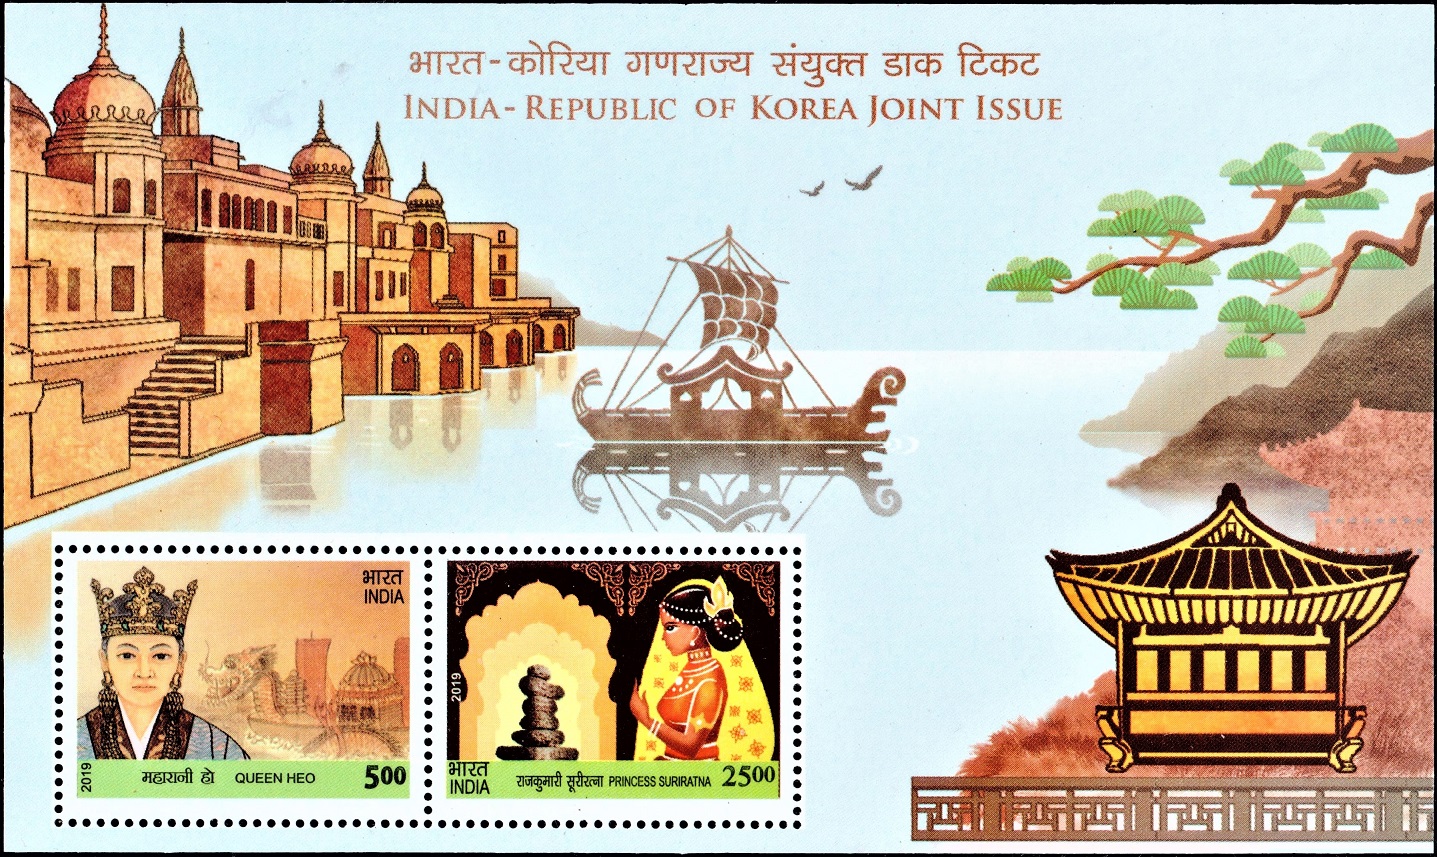 India-Republic of Korea : Joint Issue